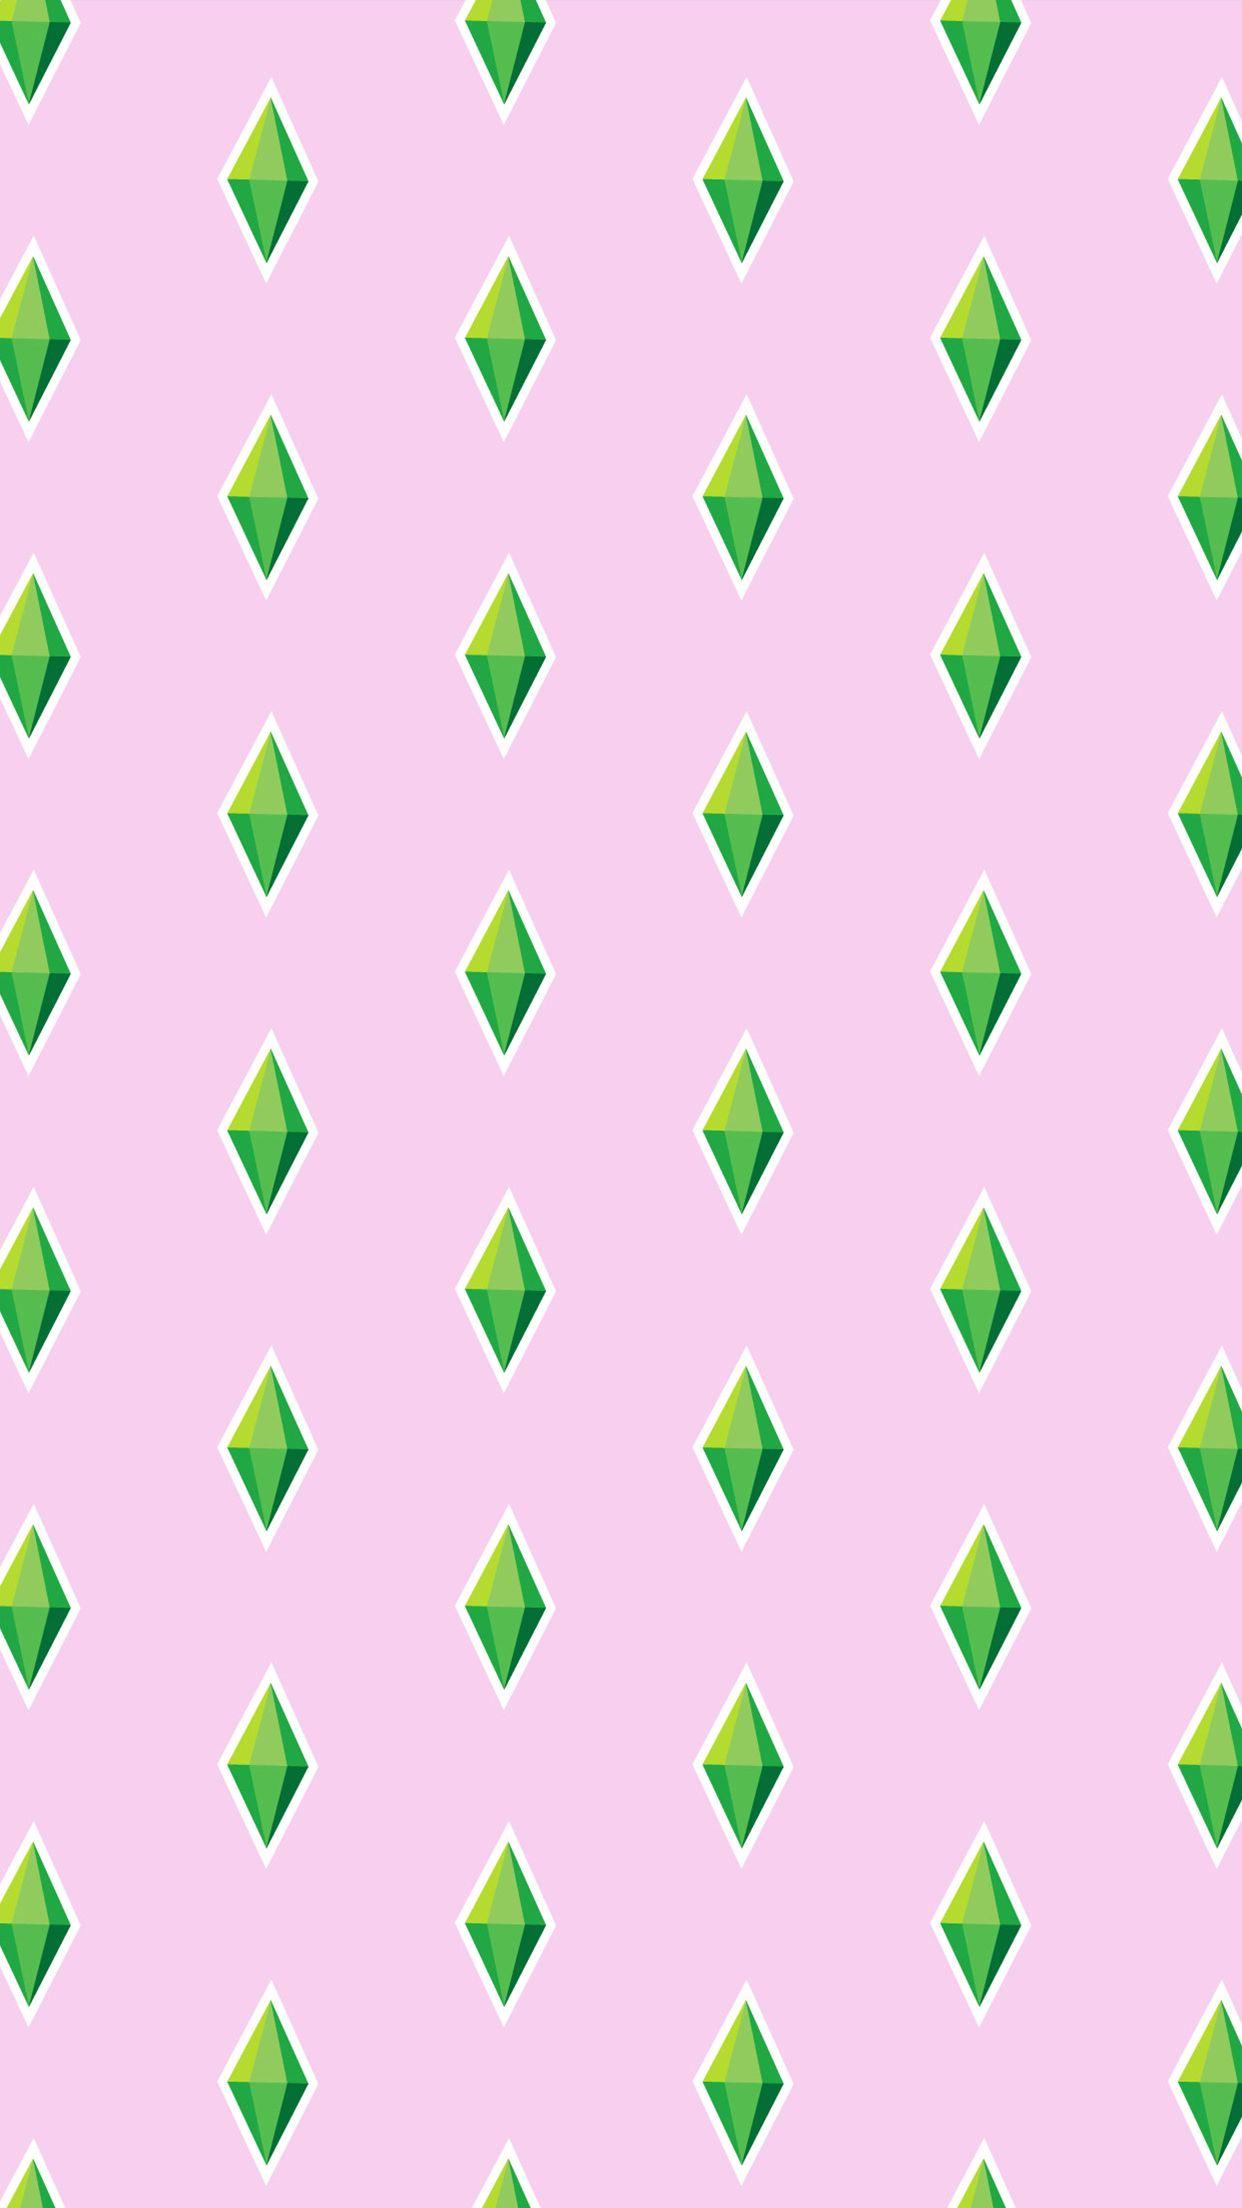 Express your very good mood with The Sims 4 Plumbob wallpaper